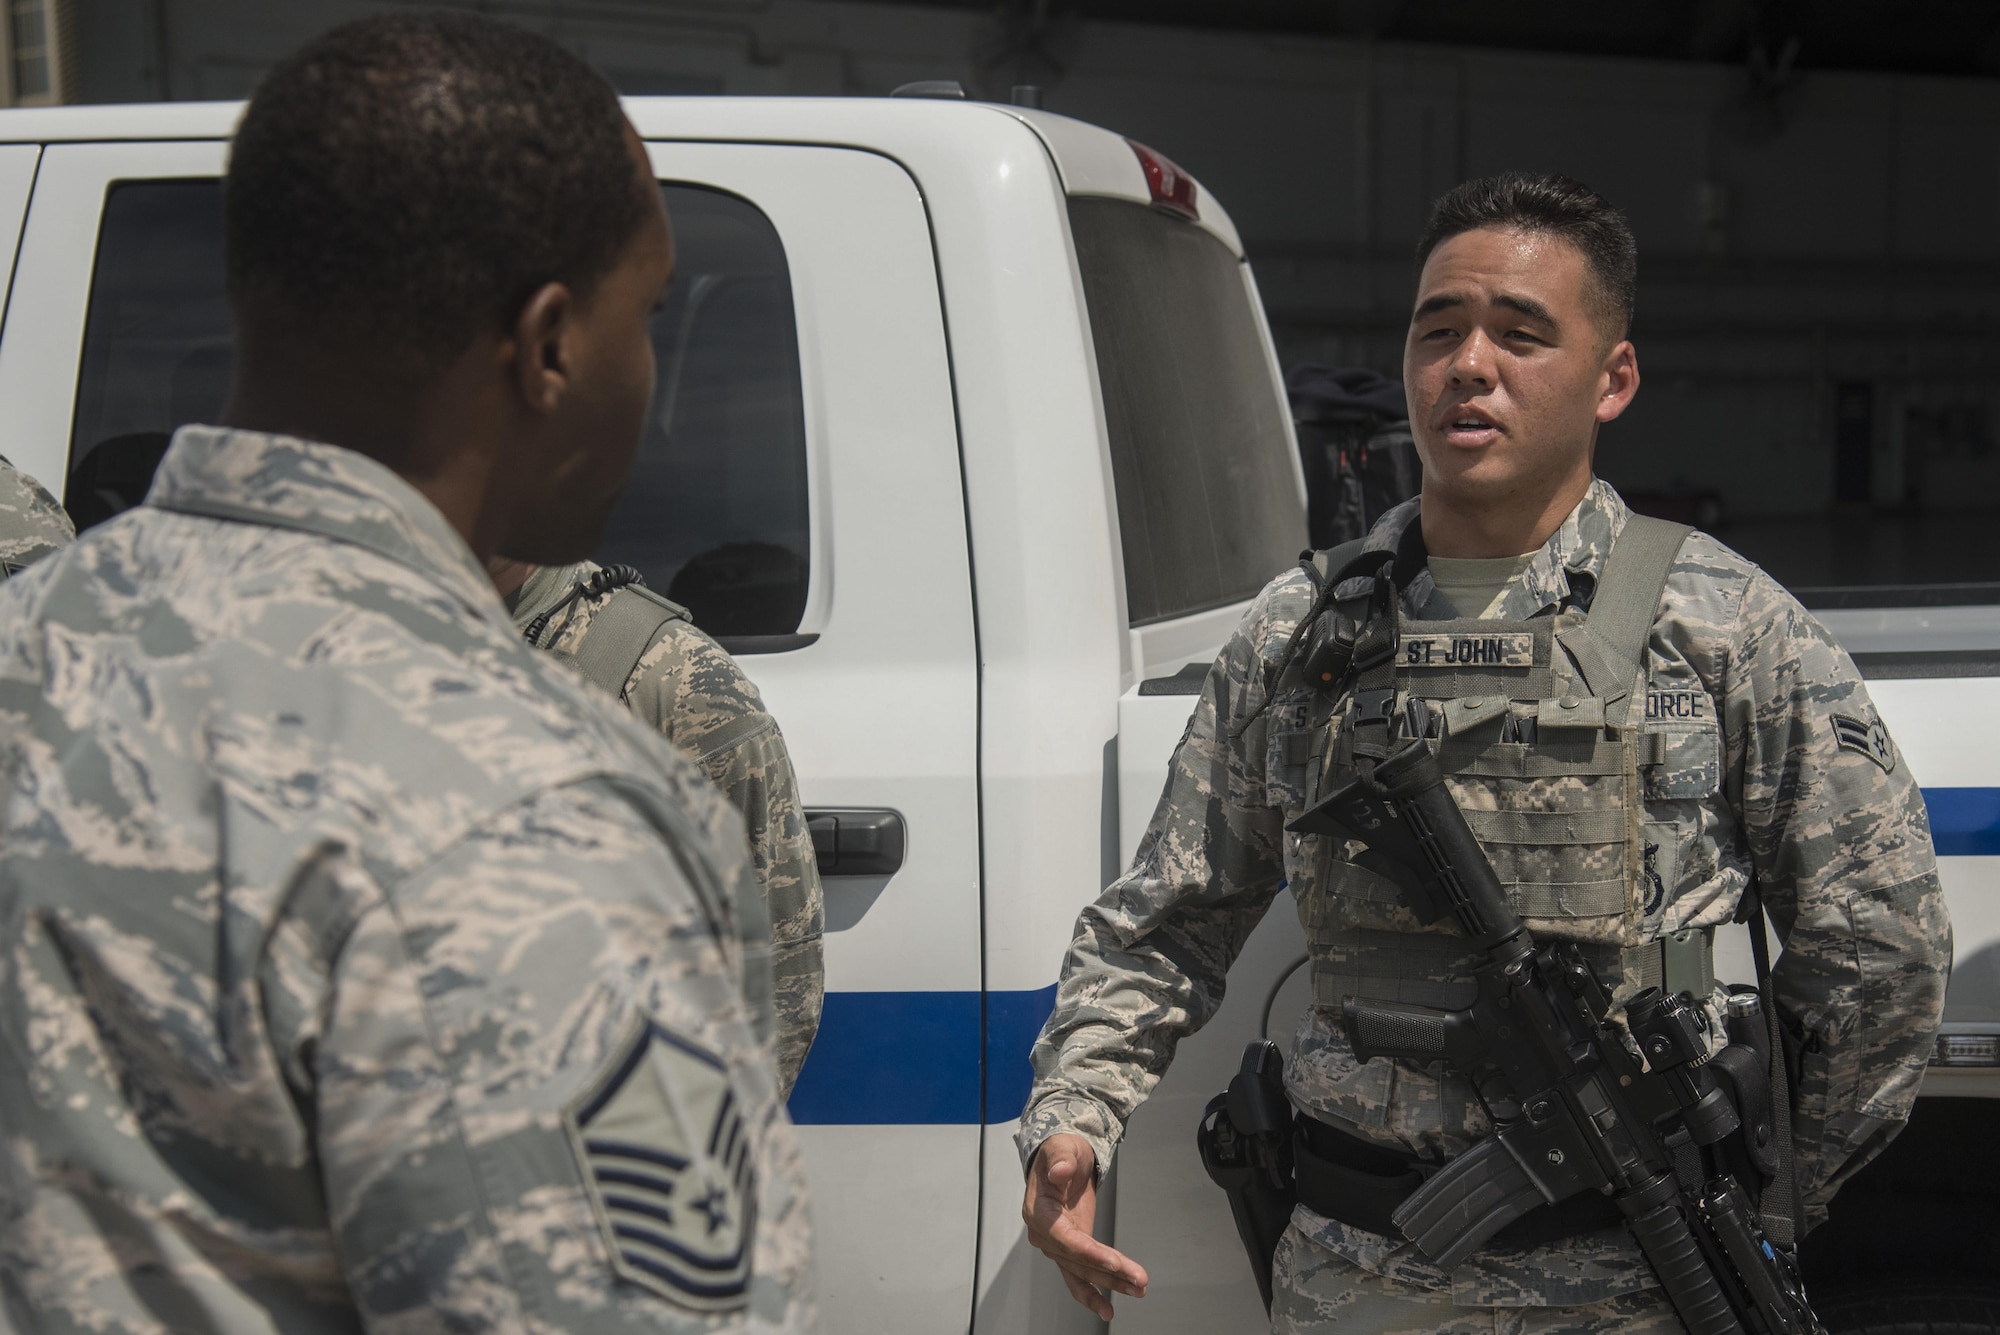 U.S. Air Force Airman 1st Class Randall St. John, an entry controller assigned to the 6th Security Forces Squadron, delivers his post briefing to Master Sgt. Adrian Wright, sustainment services flight superintendent assigned to the 6th Force Support Squadron, at MacDill Air Force Base, Fla., Sept. 21, 2017.